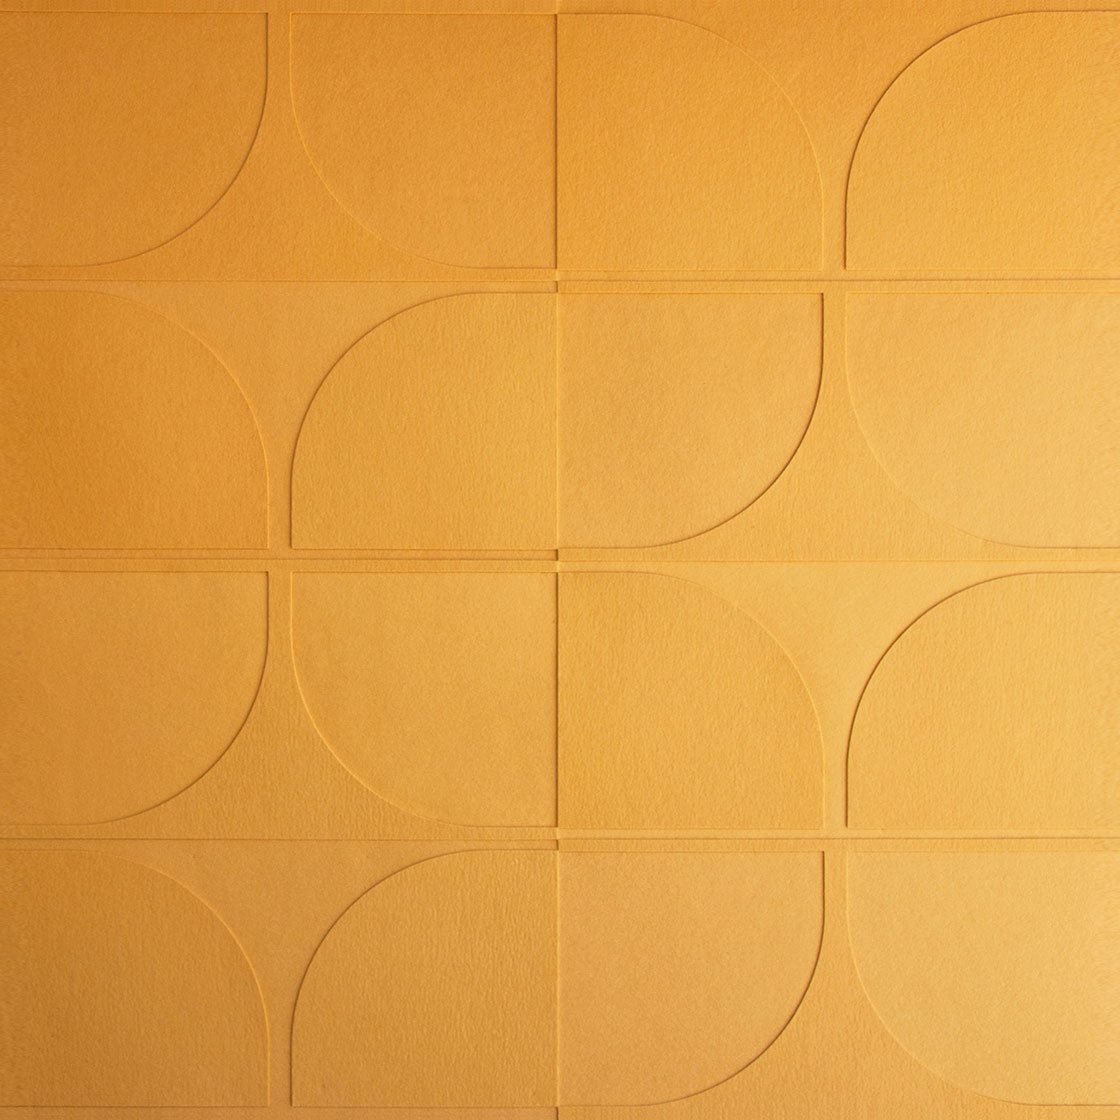 A closeup of muted orange felt wall covering with quarter circle patterns.